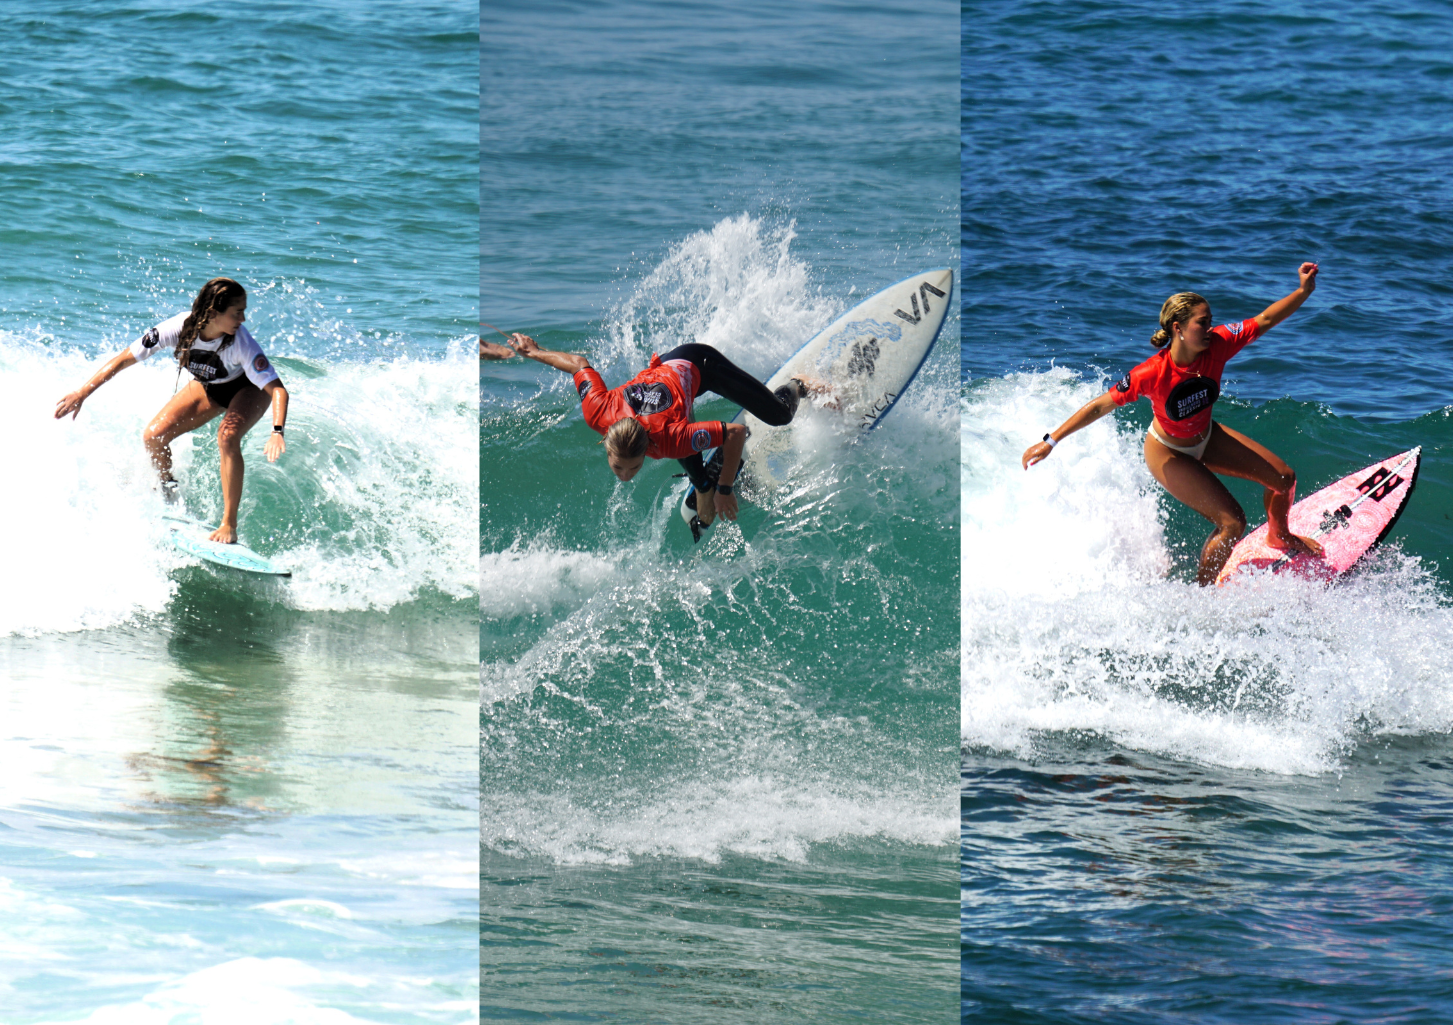 A three-panel image showing two young women and a young man carving up waves on surfboards.